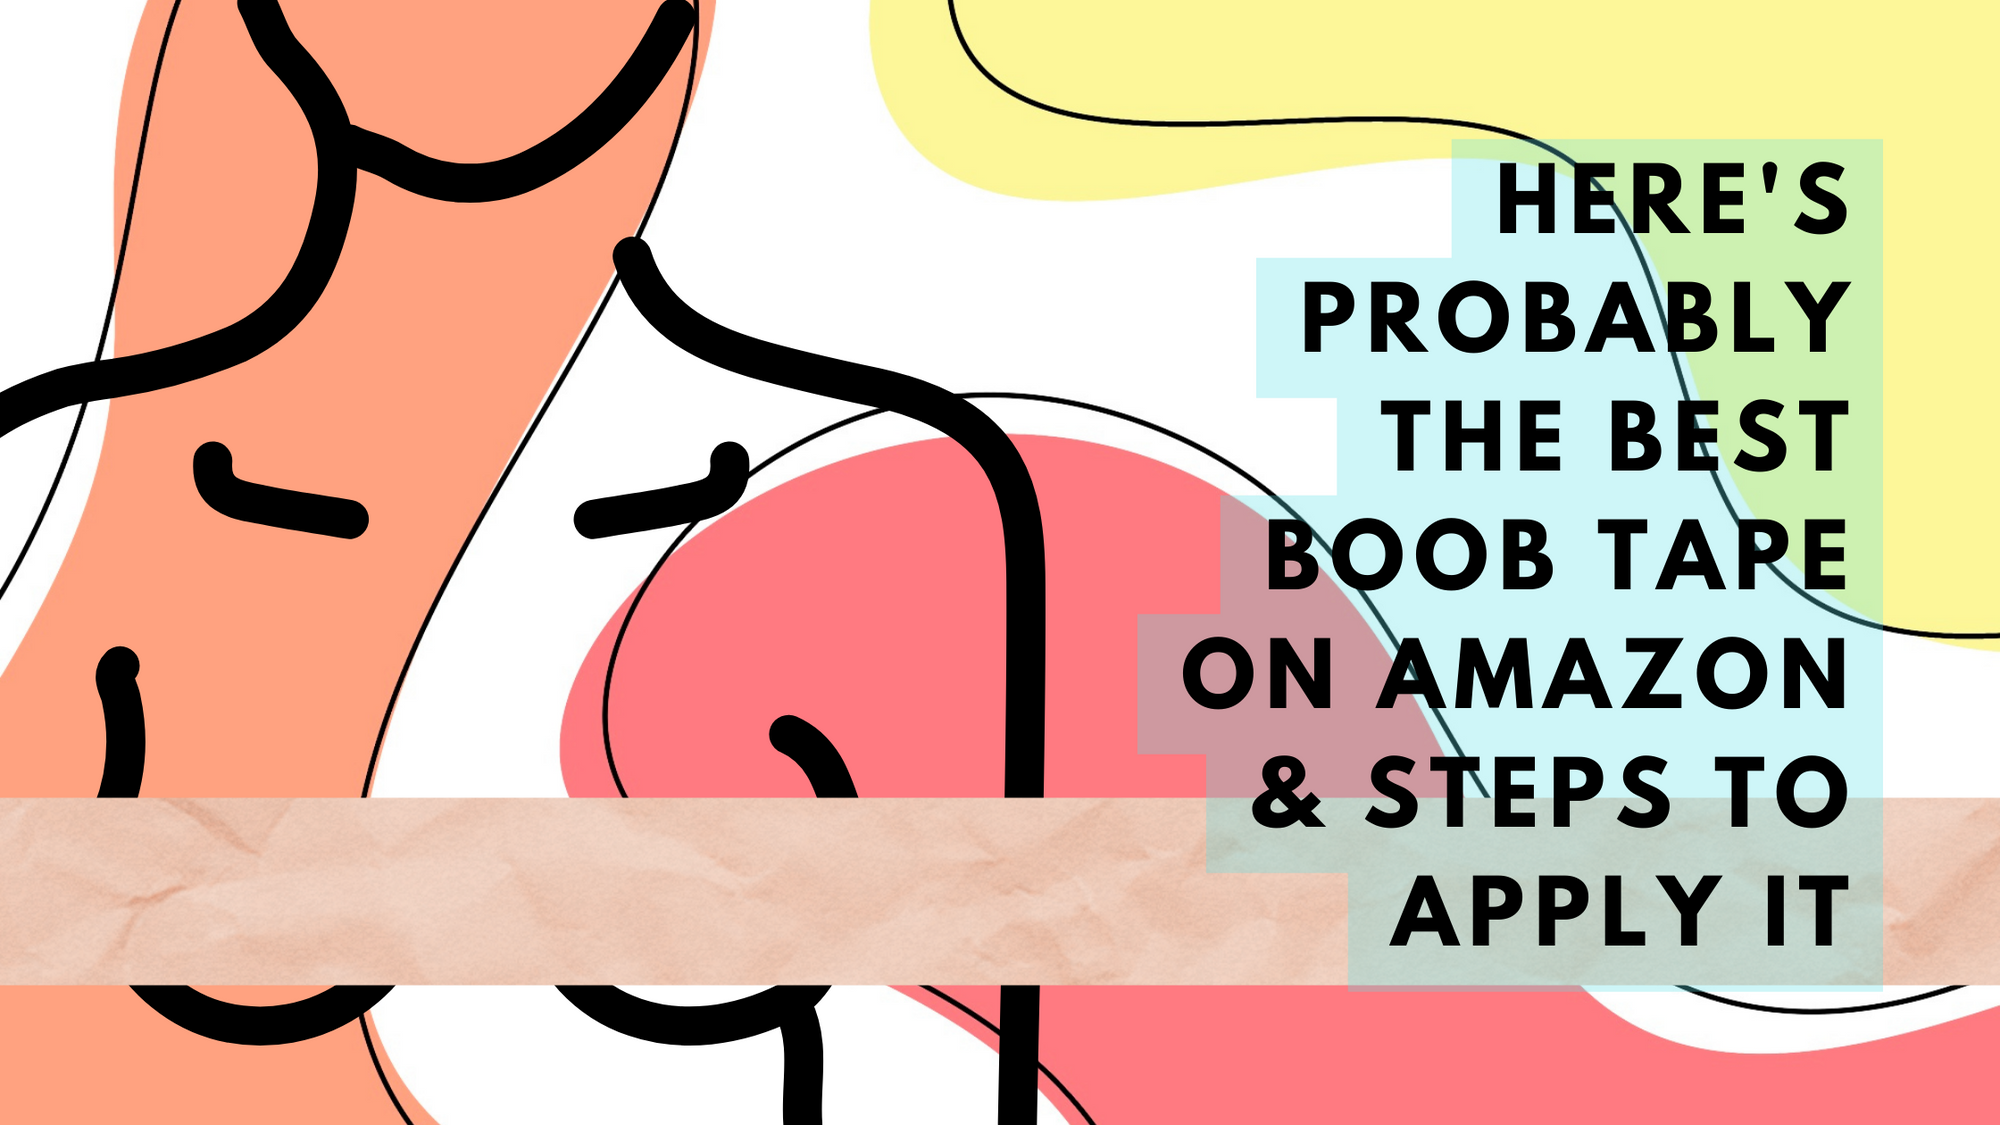 Here's probably the best boob tape on amazon & steps to apply it